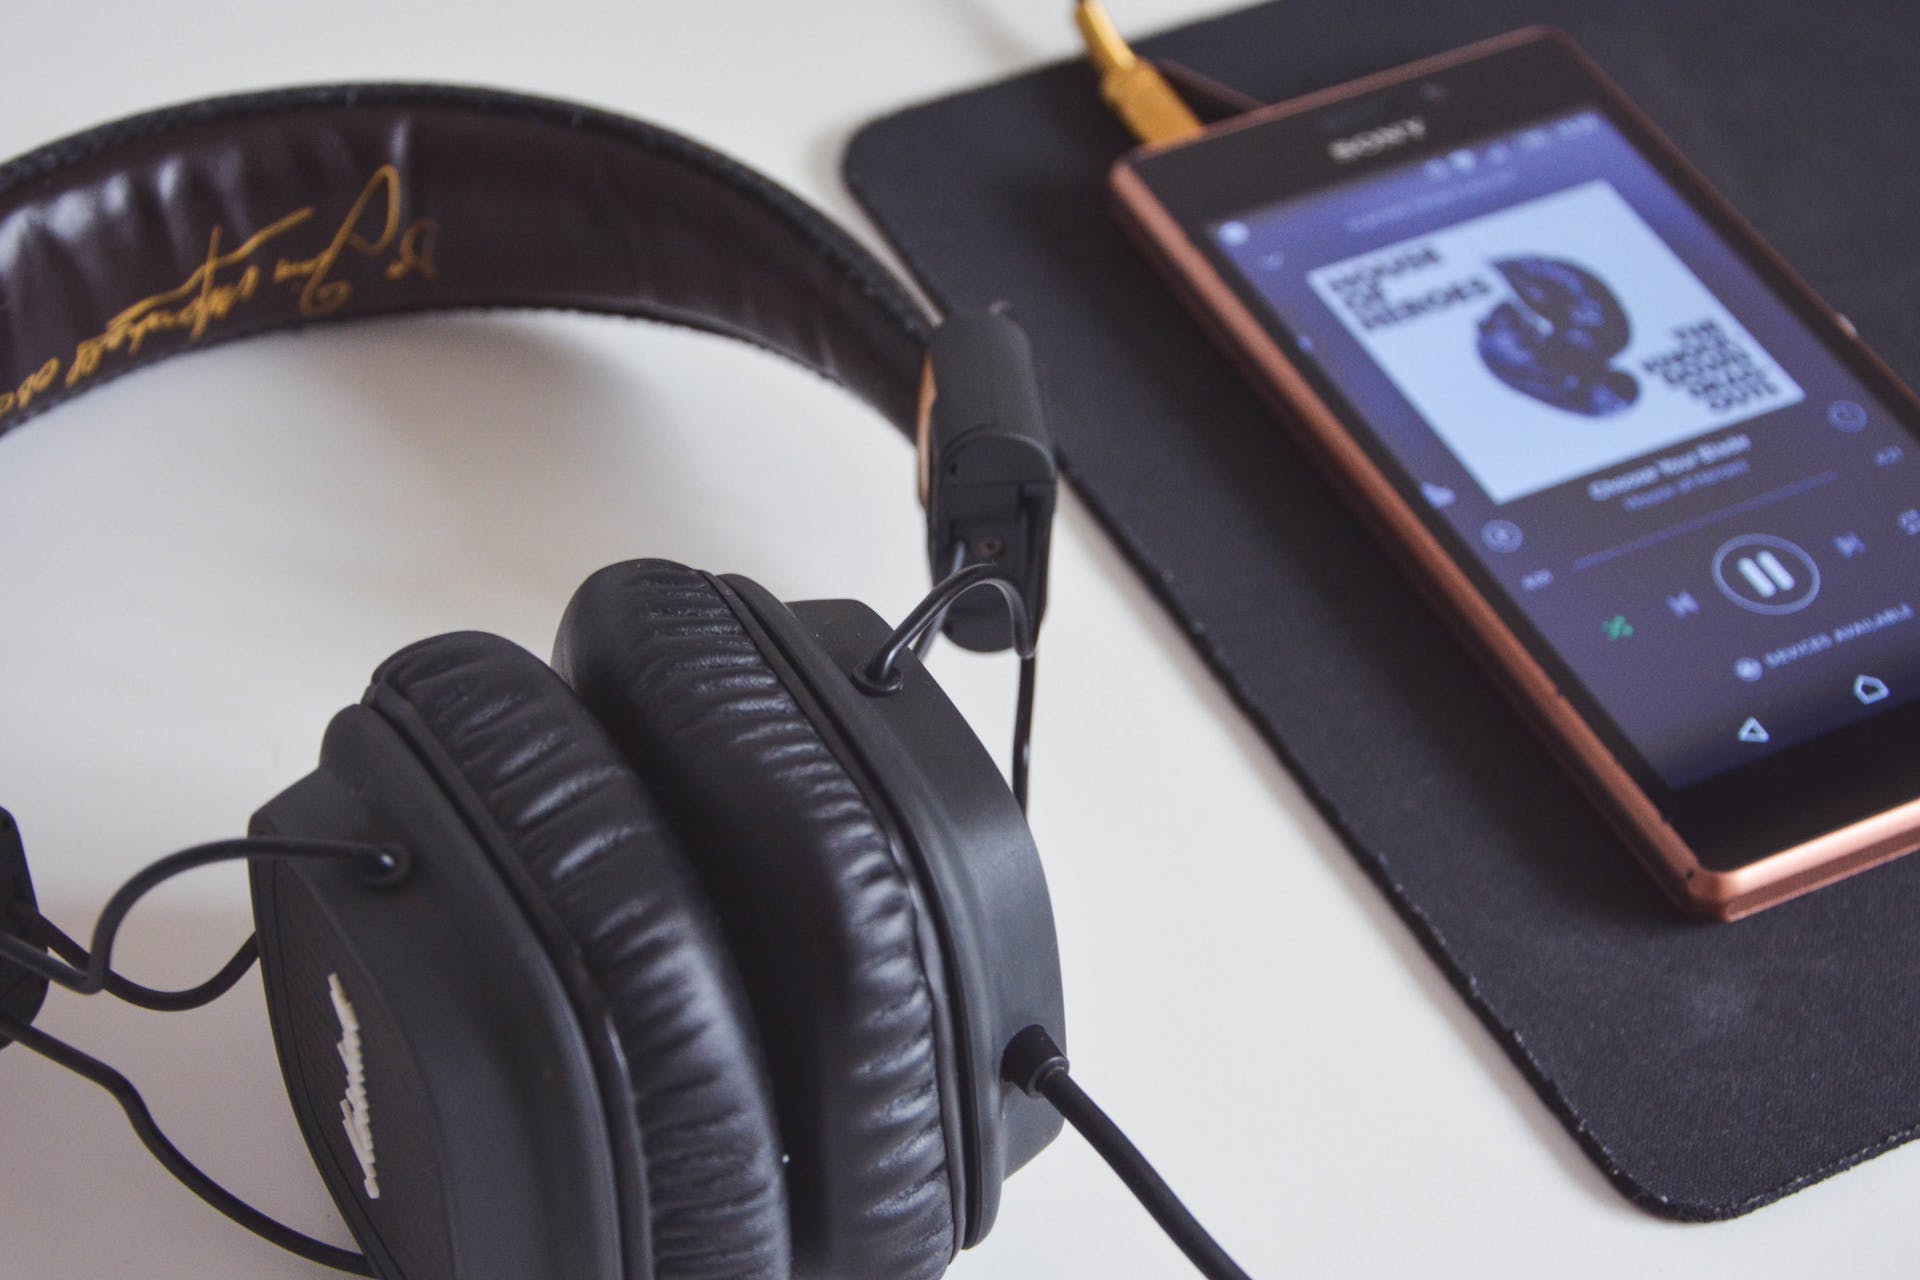 A headphone next to a phone on a table | Source: Pexels